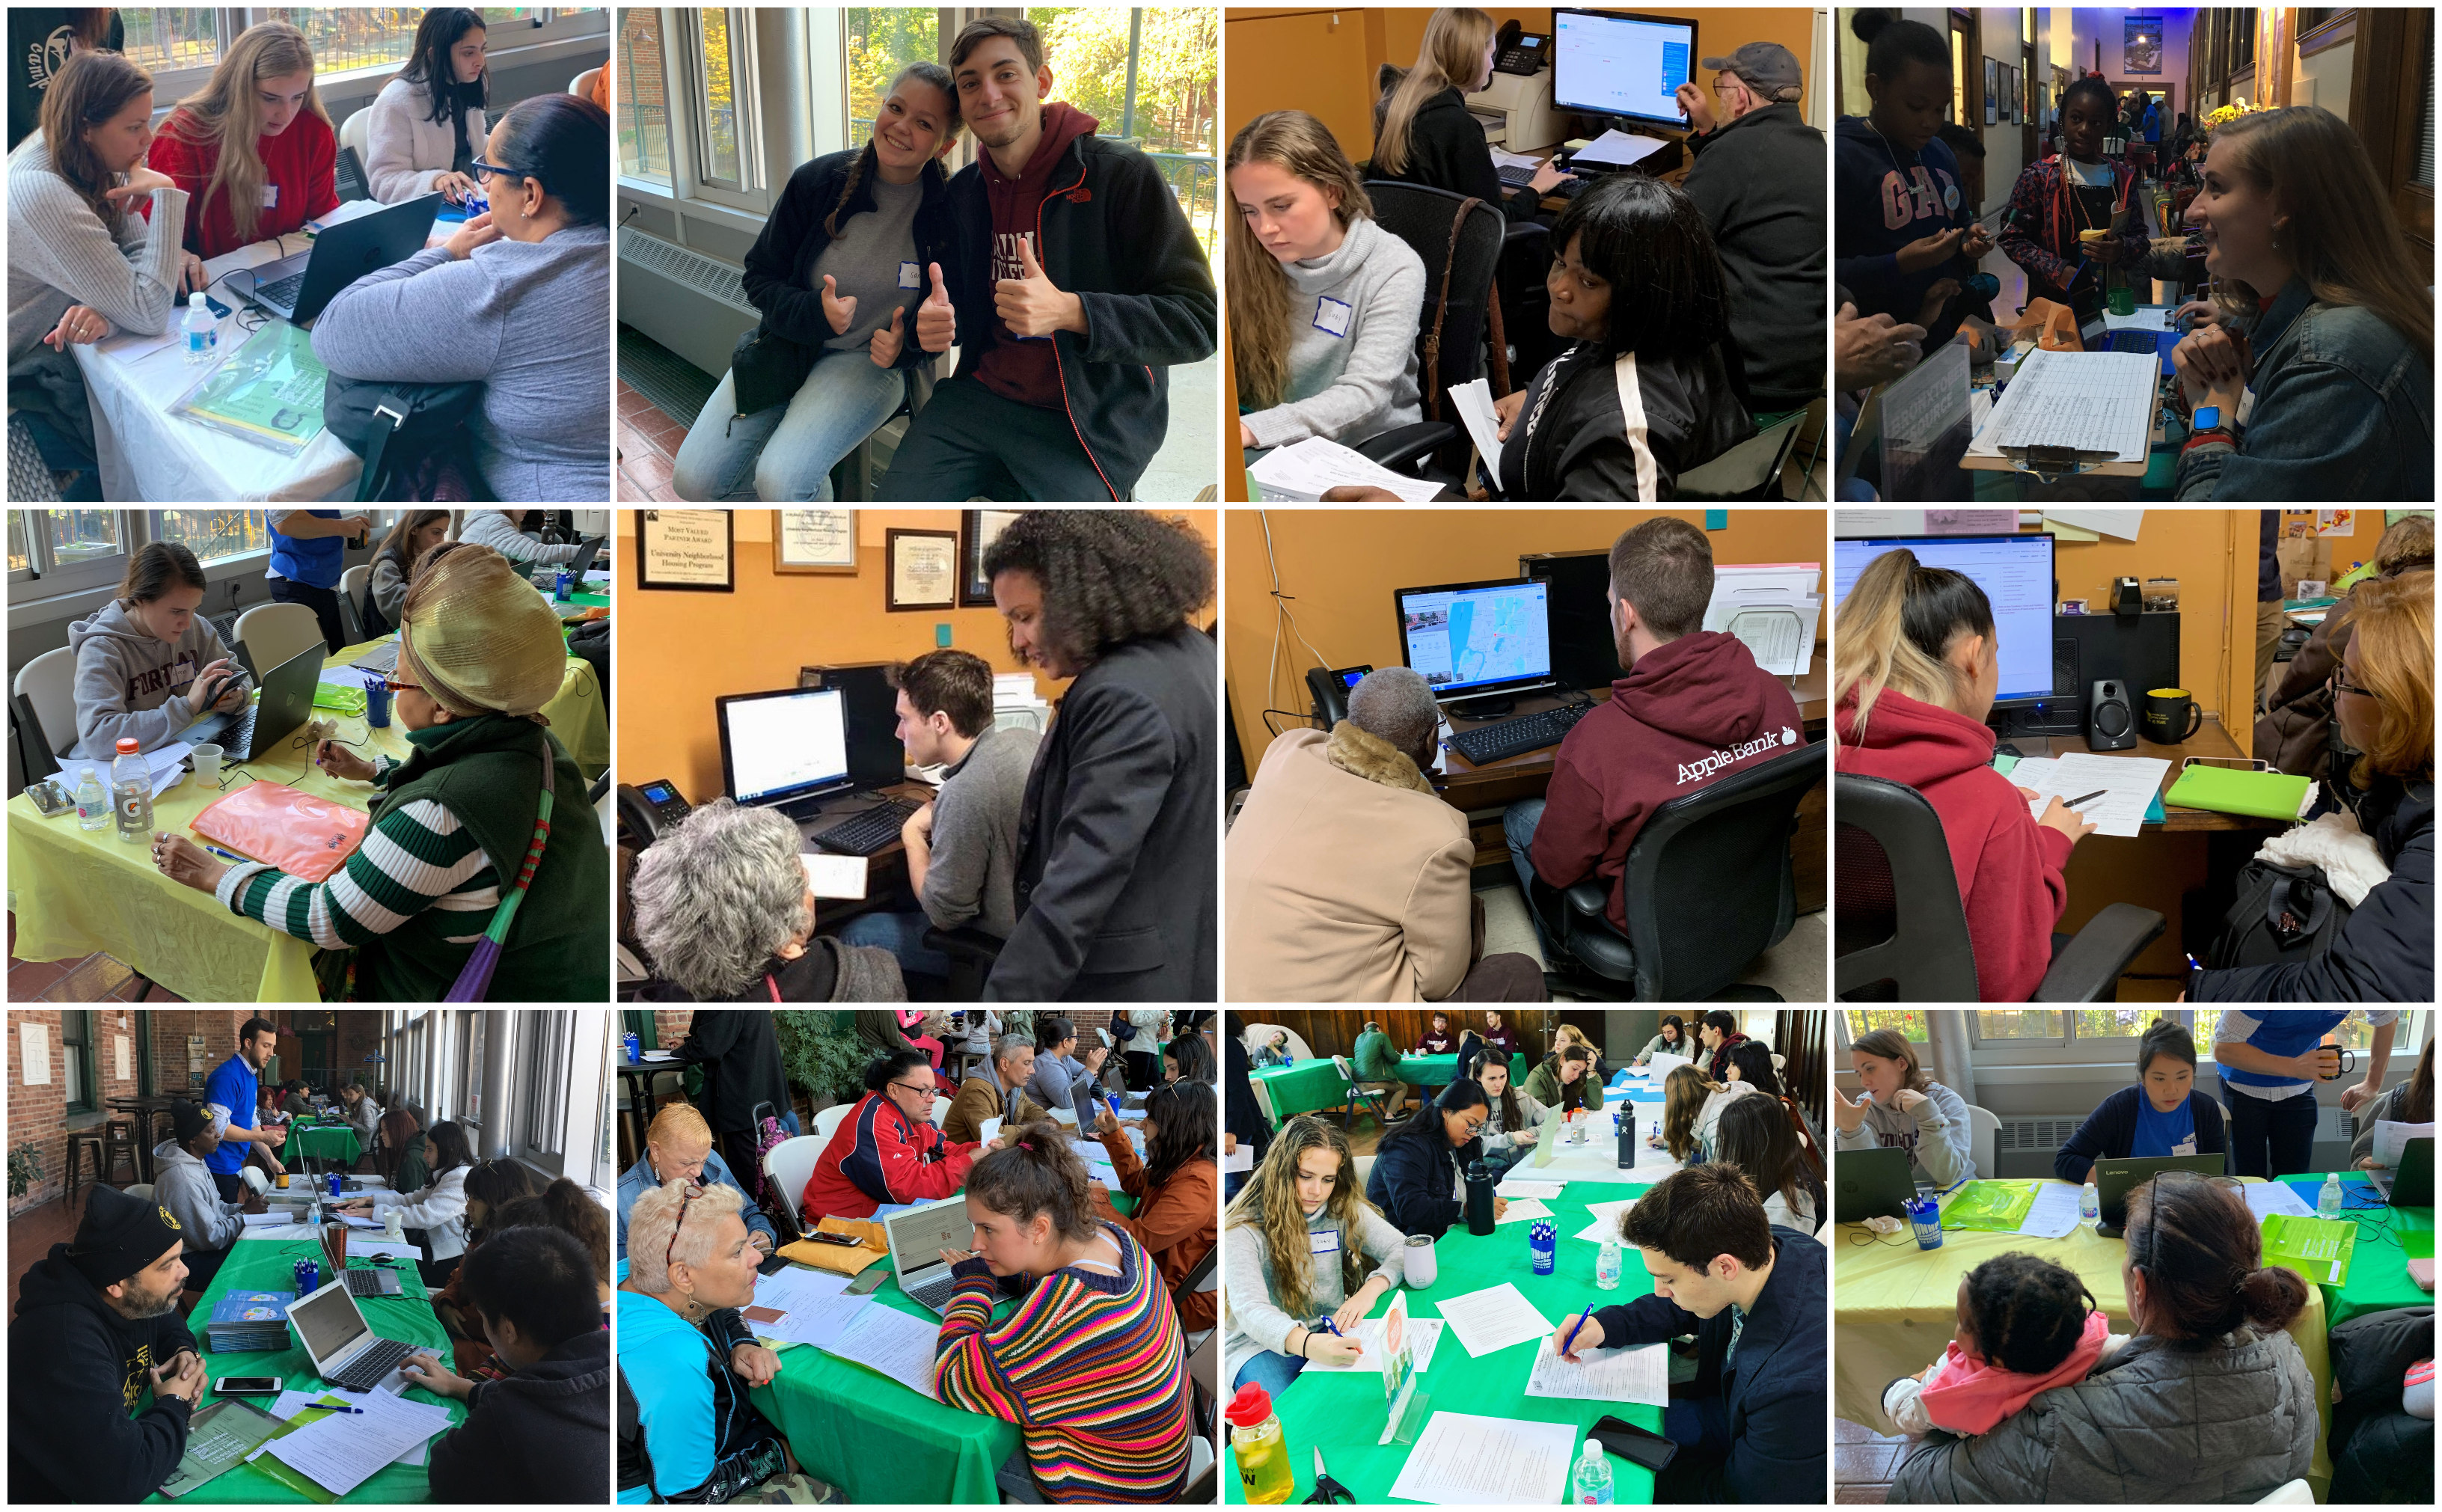 Student volunteers from Fordham University and manhattan College were the lynchpin that made this day a success! Volunteers were trained bright and early in Housing Connect enrollment and then worked non-stop to provie access to the bronx neighbors to NYC's online affordablehousing lottery.